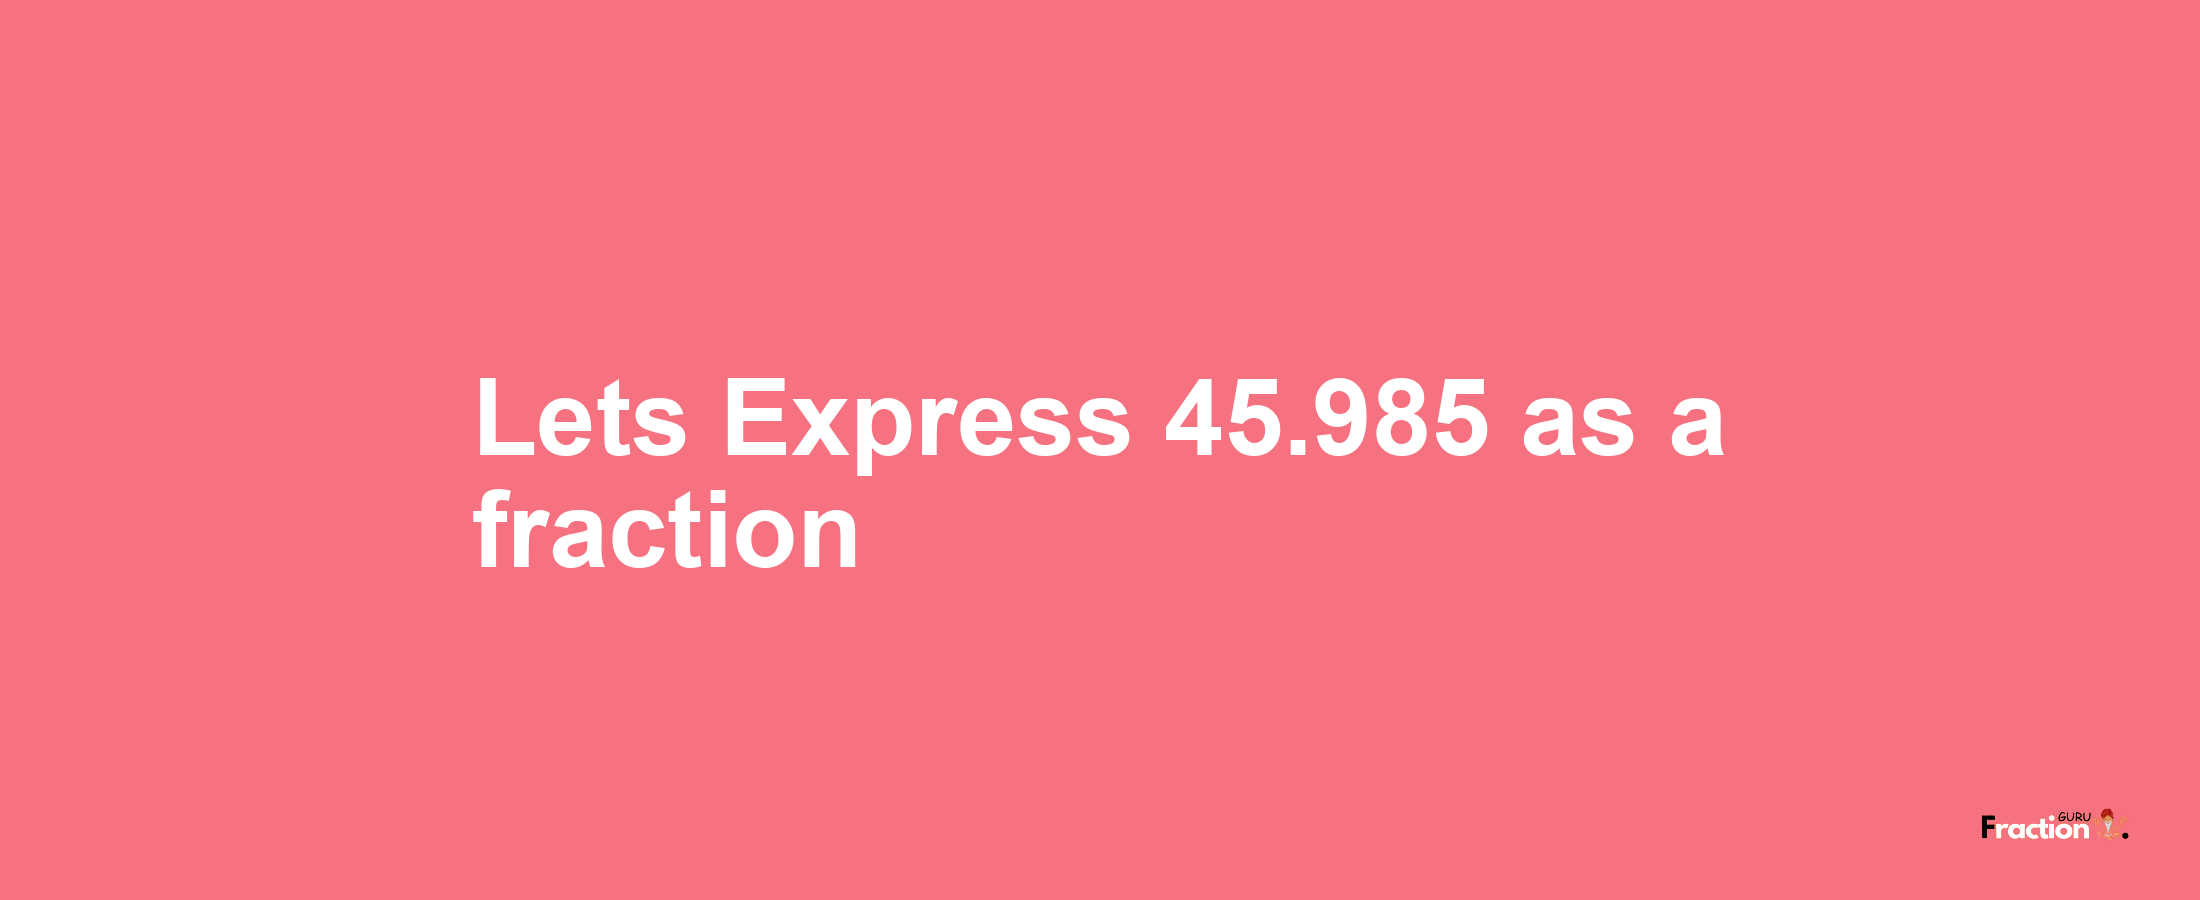 Lets Express 45.985 as afraction